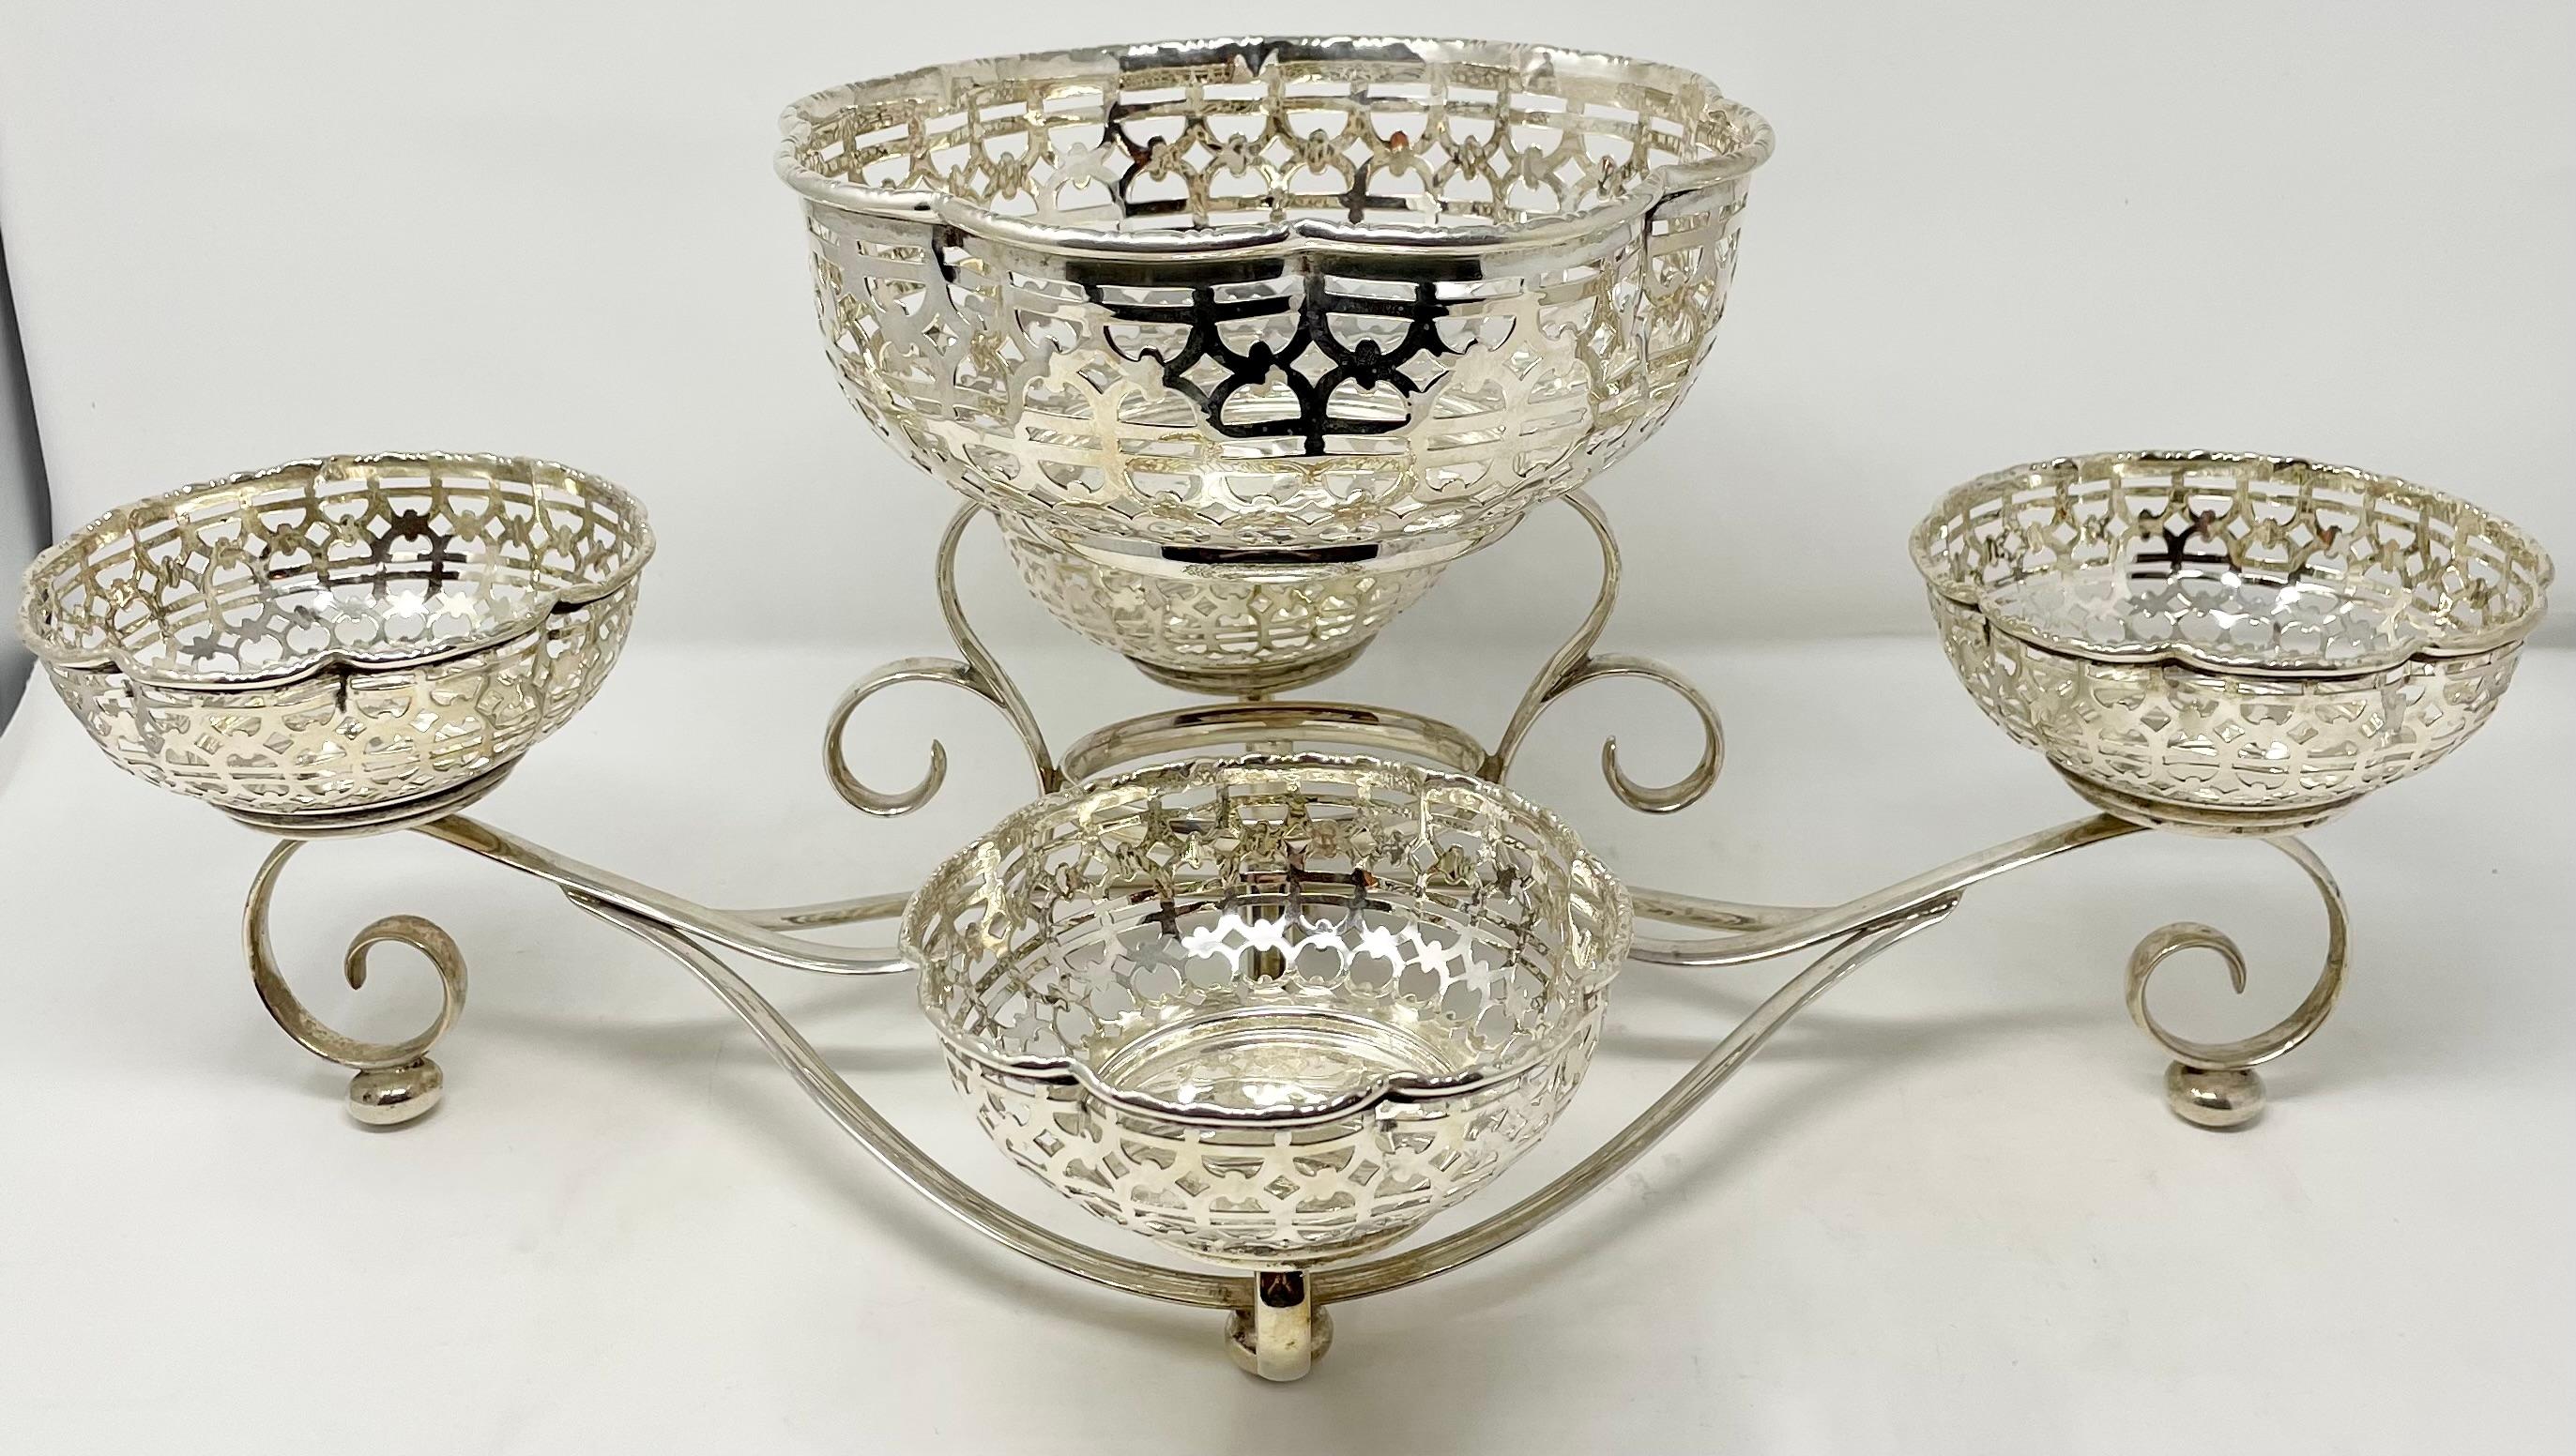 Antique English Silver-Plated 5 Piece Floral Epergne Centerpiece with Intricate Piercework, Circa 1900.